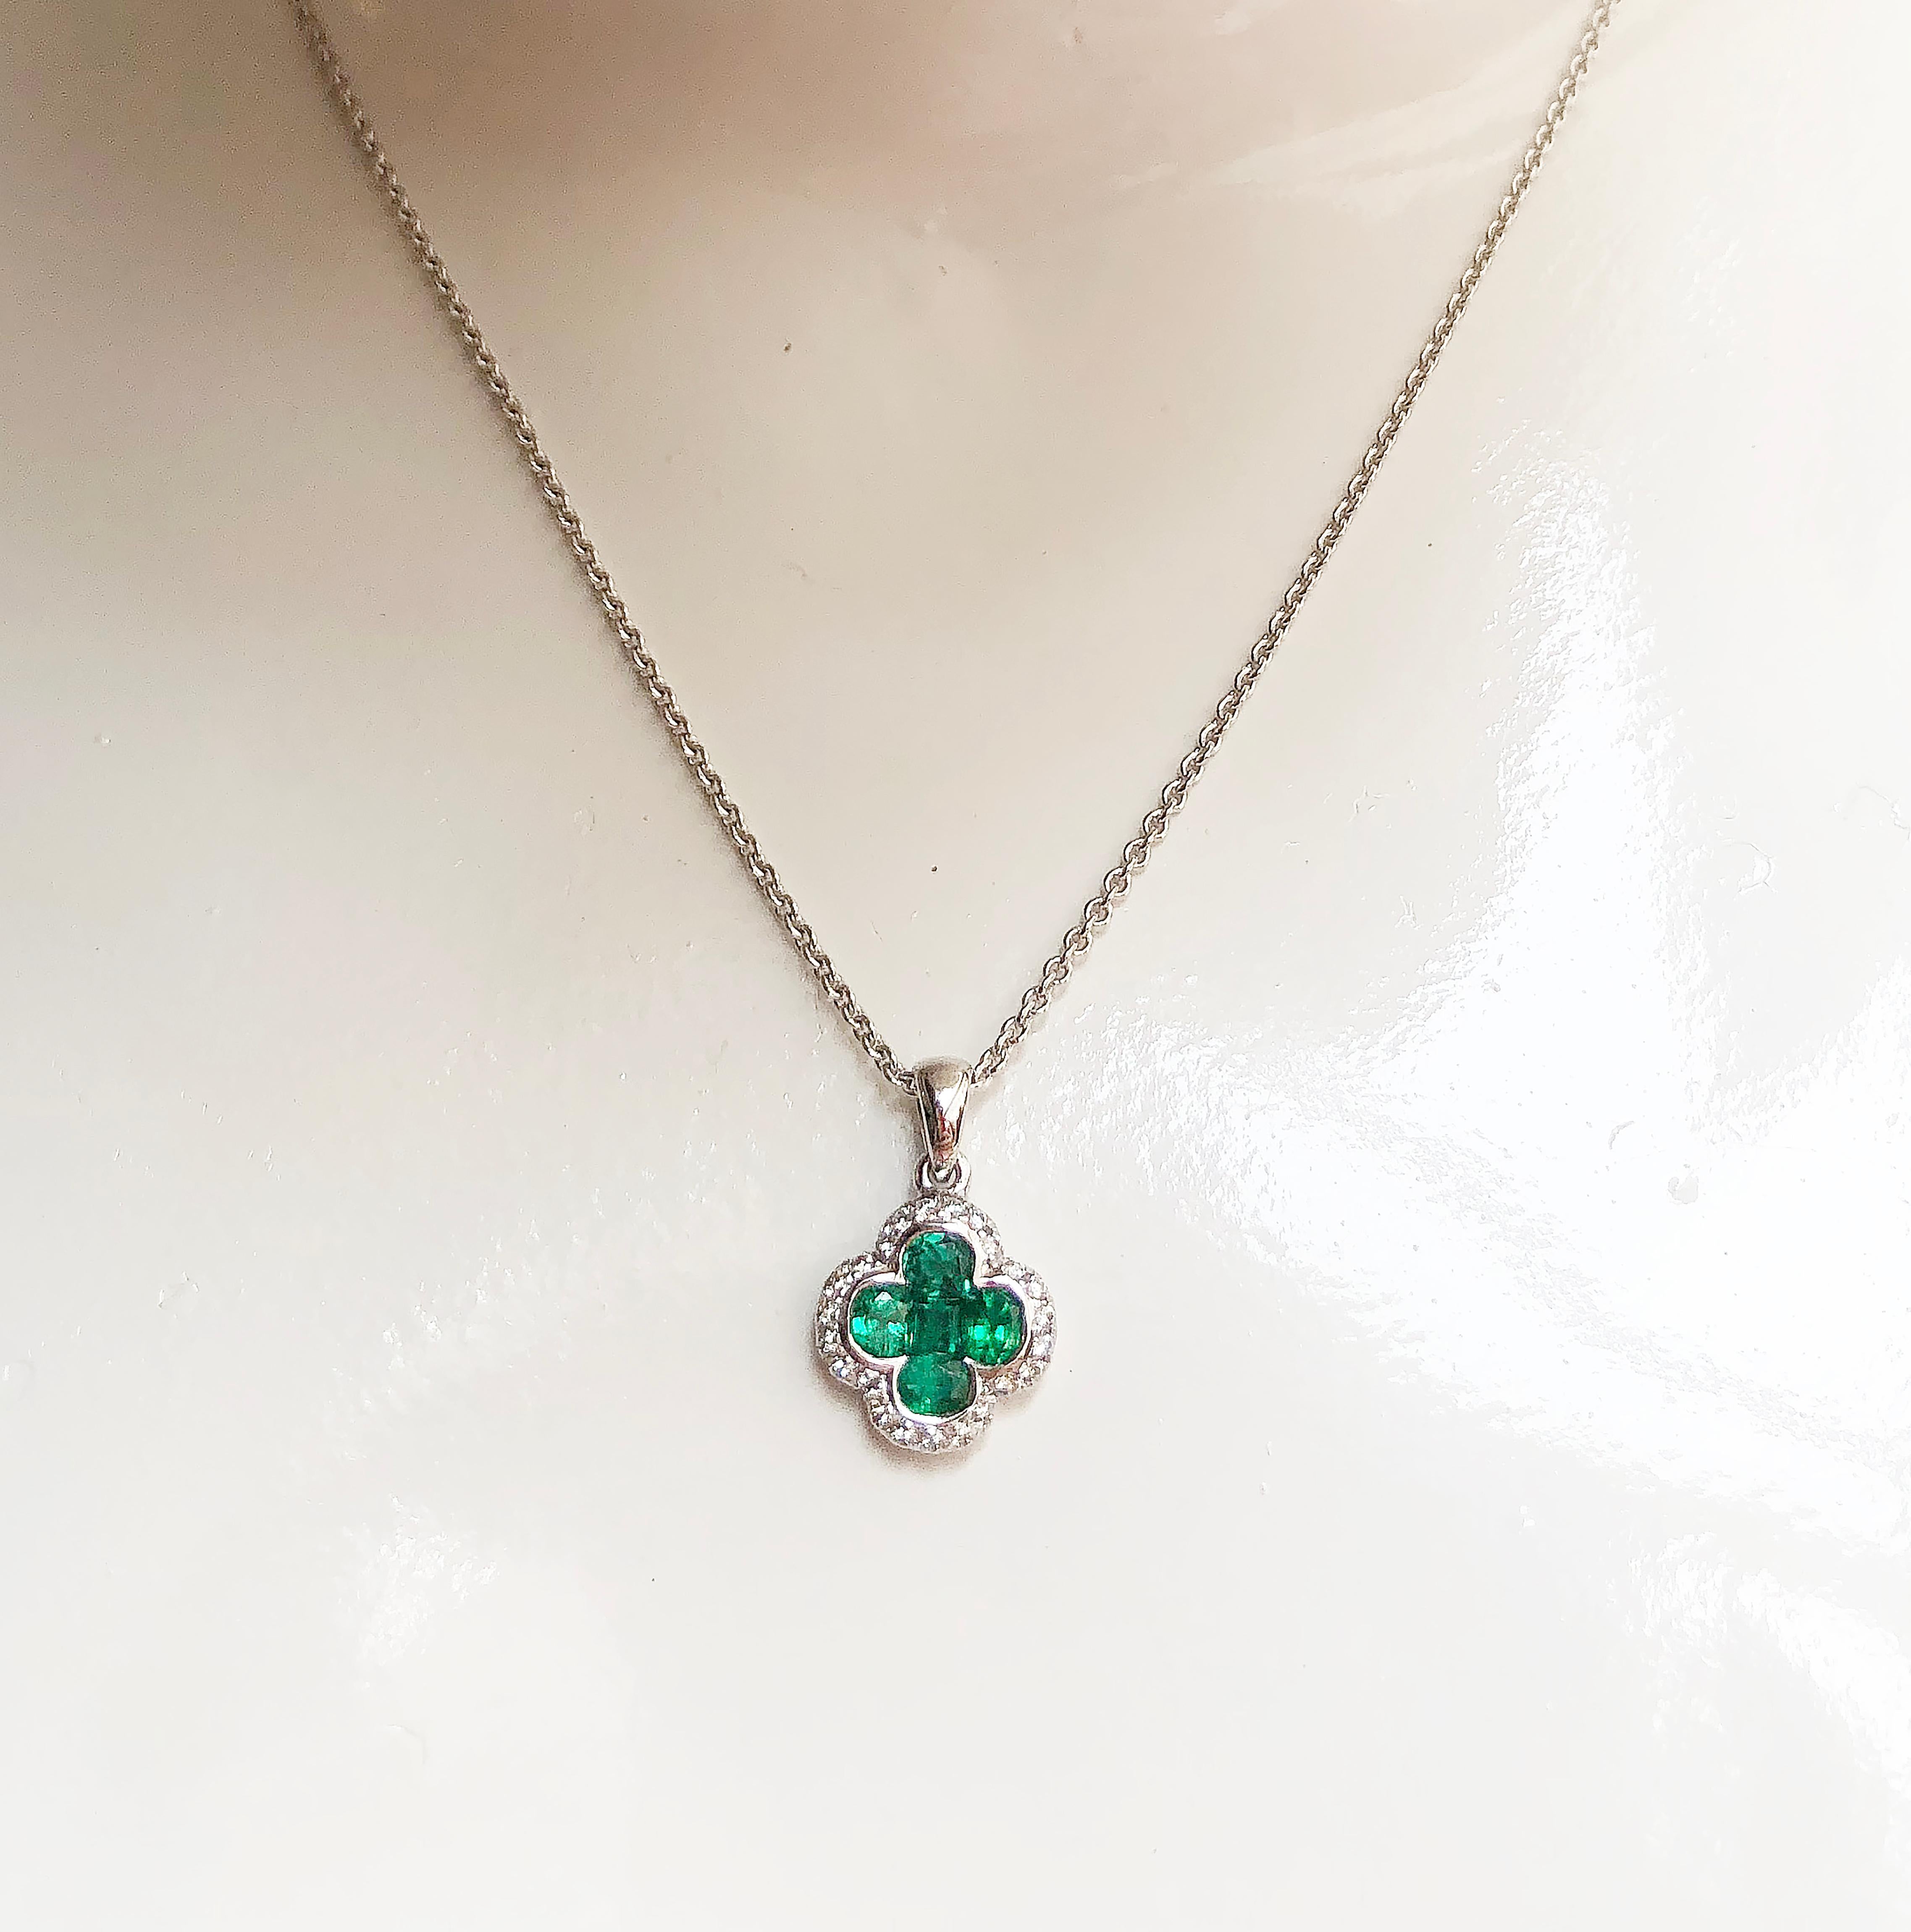 Emerald 0.80 carat with Diamond 0.15 carat Pendant set in 18 Karat Gold Settings
(chain not included)

Width:  1.1 cm 
Length: 1.8 cm
Total Weight: 1.60 grams

